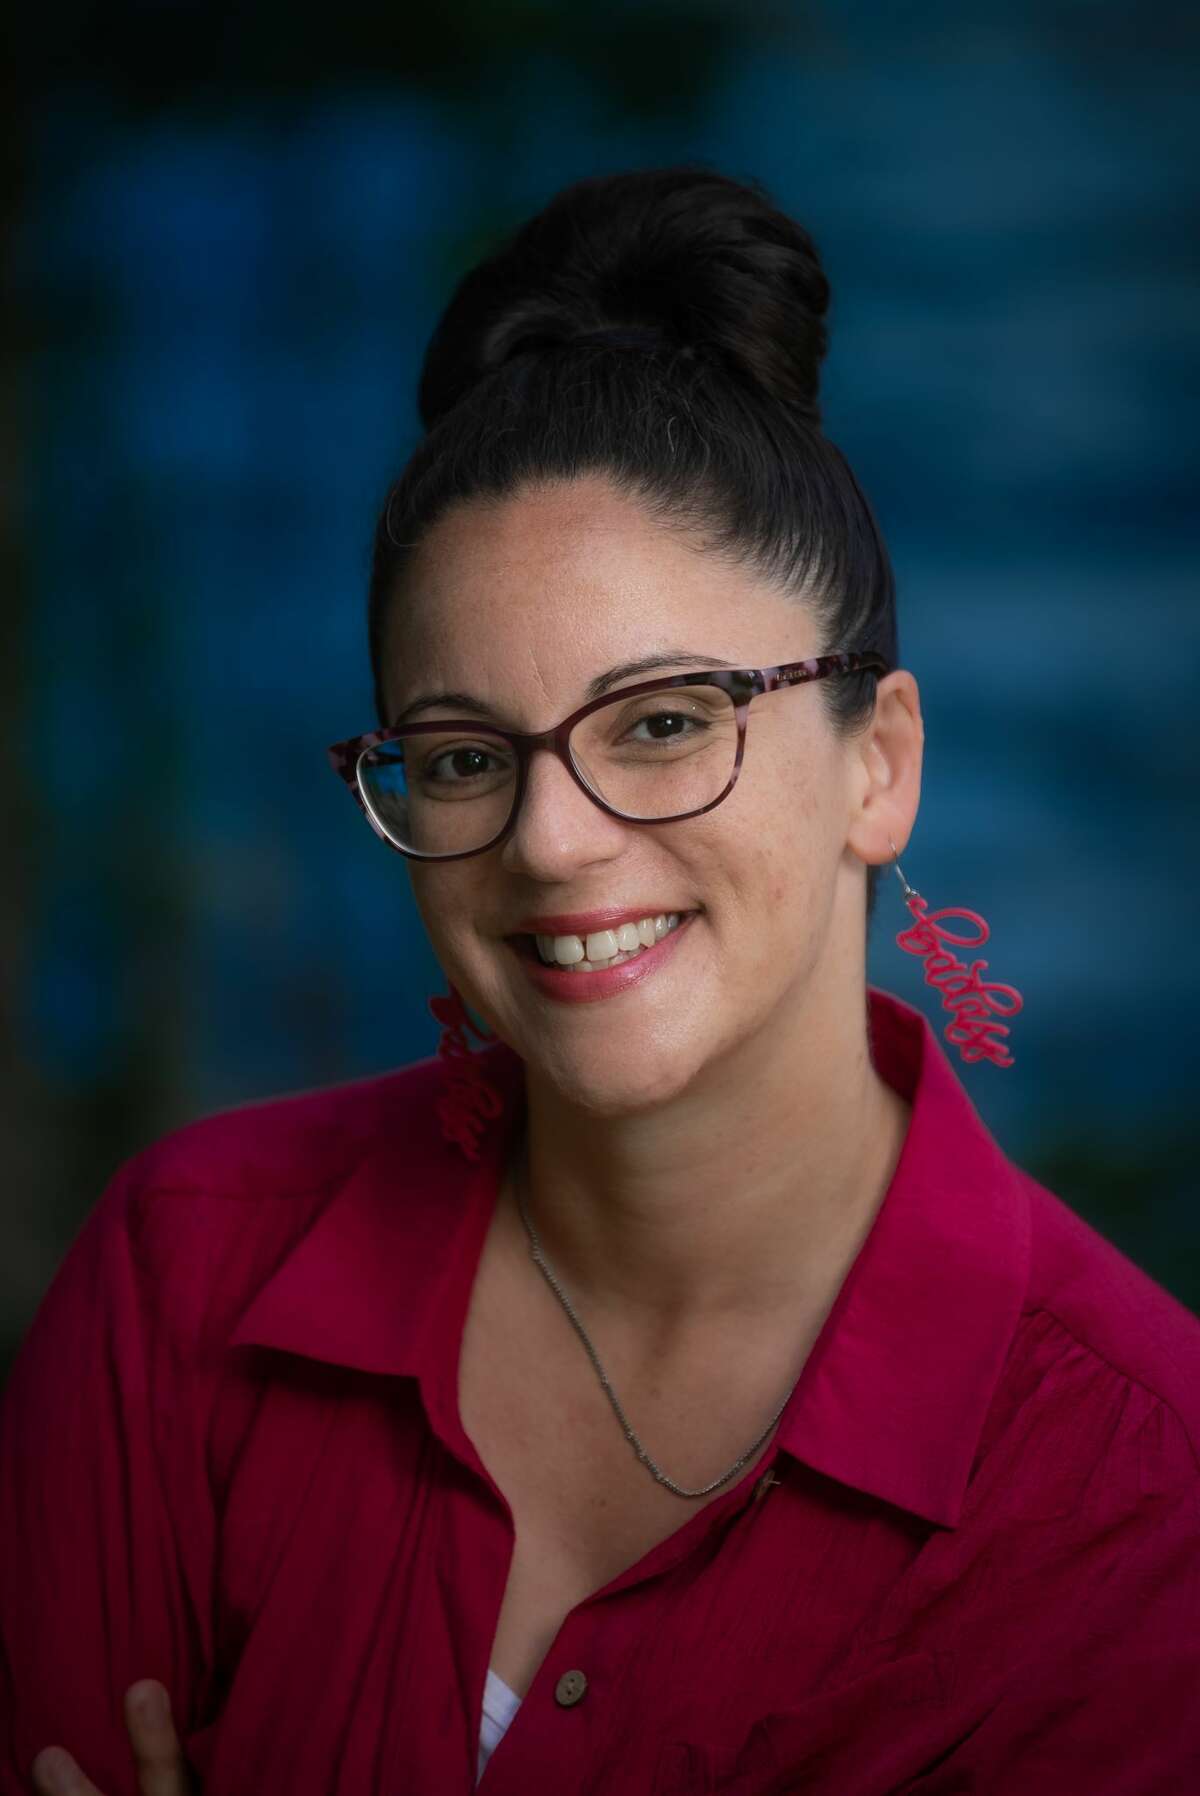 Jessica N. Pabón-Colón, an associate Professor in Department of Women's, Gender, and Sexuality Studies at SUNY New Paltz, was approved for tenure in September 2020. 